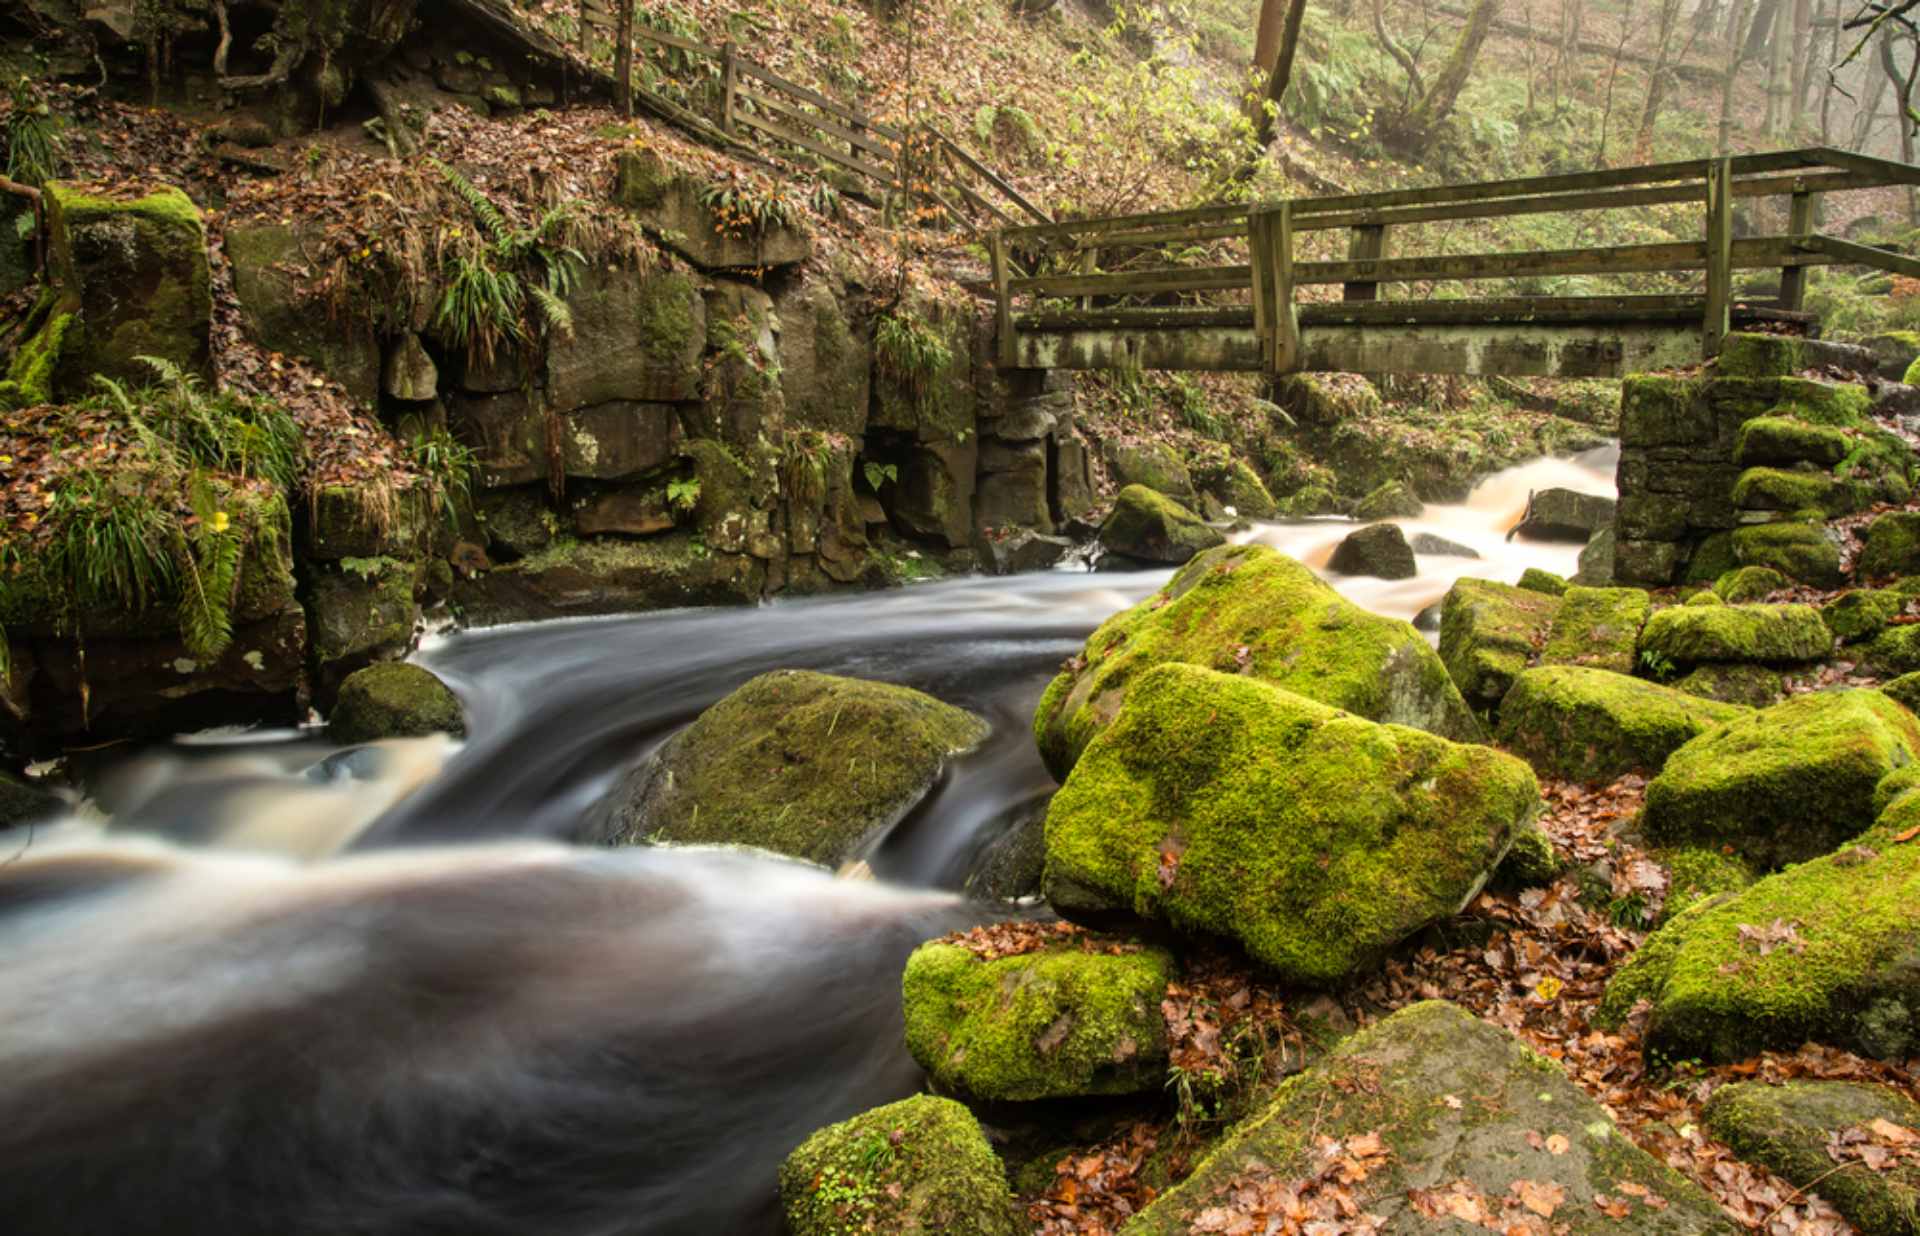 stream-rushing-under-small-wooden-bridge-in-forest-padley-gorge